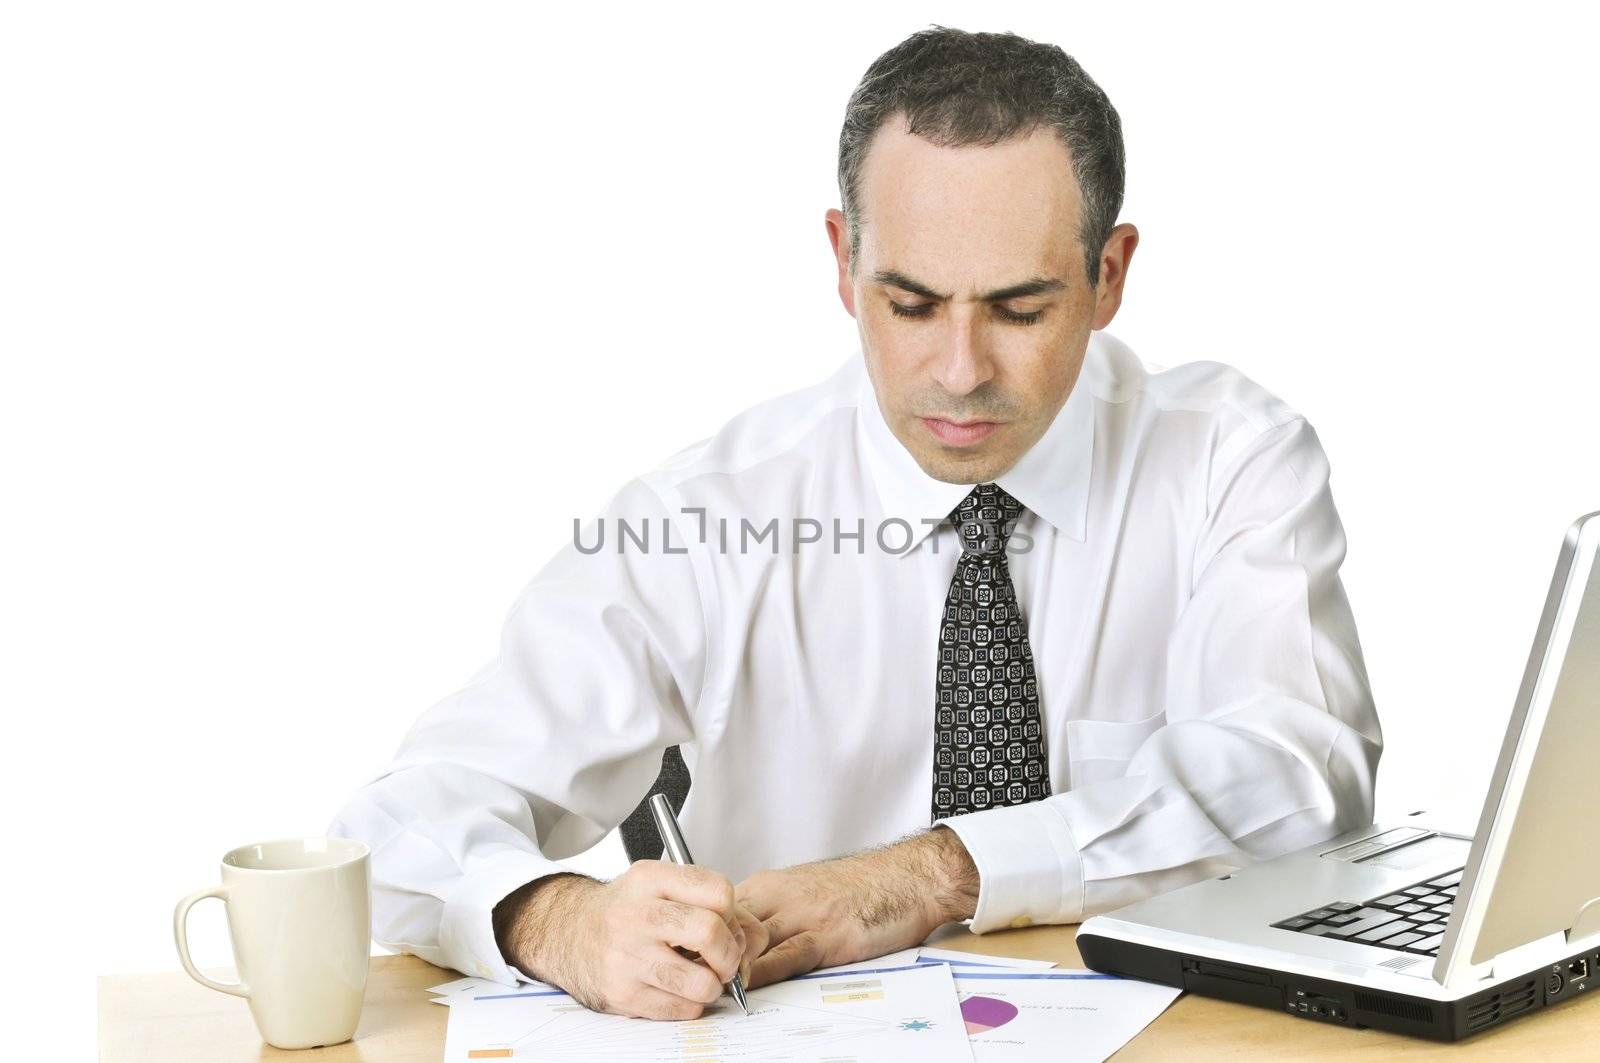 Serious office worker reviewing generic reports at his desk